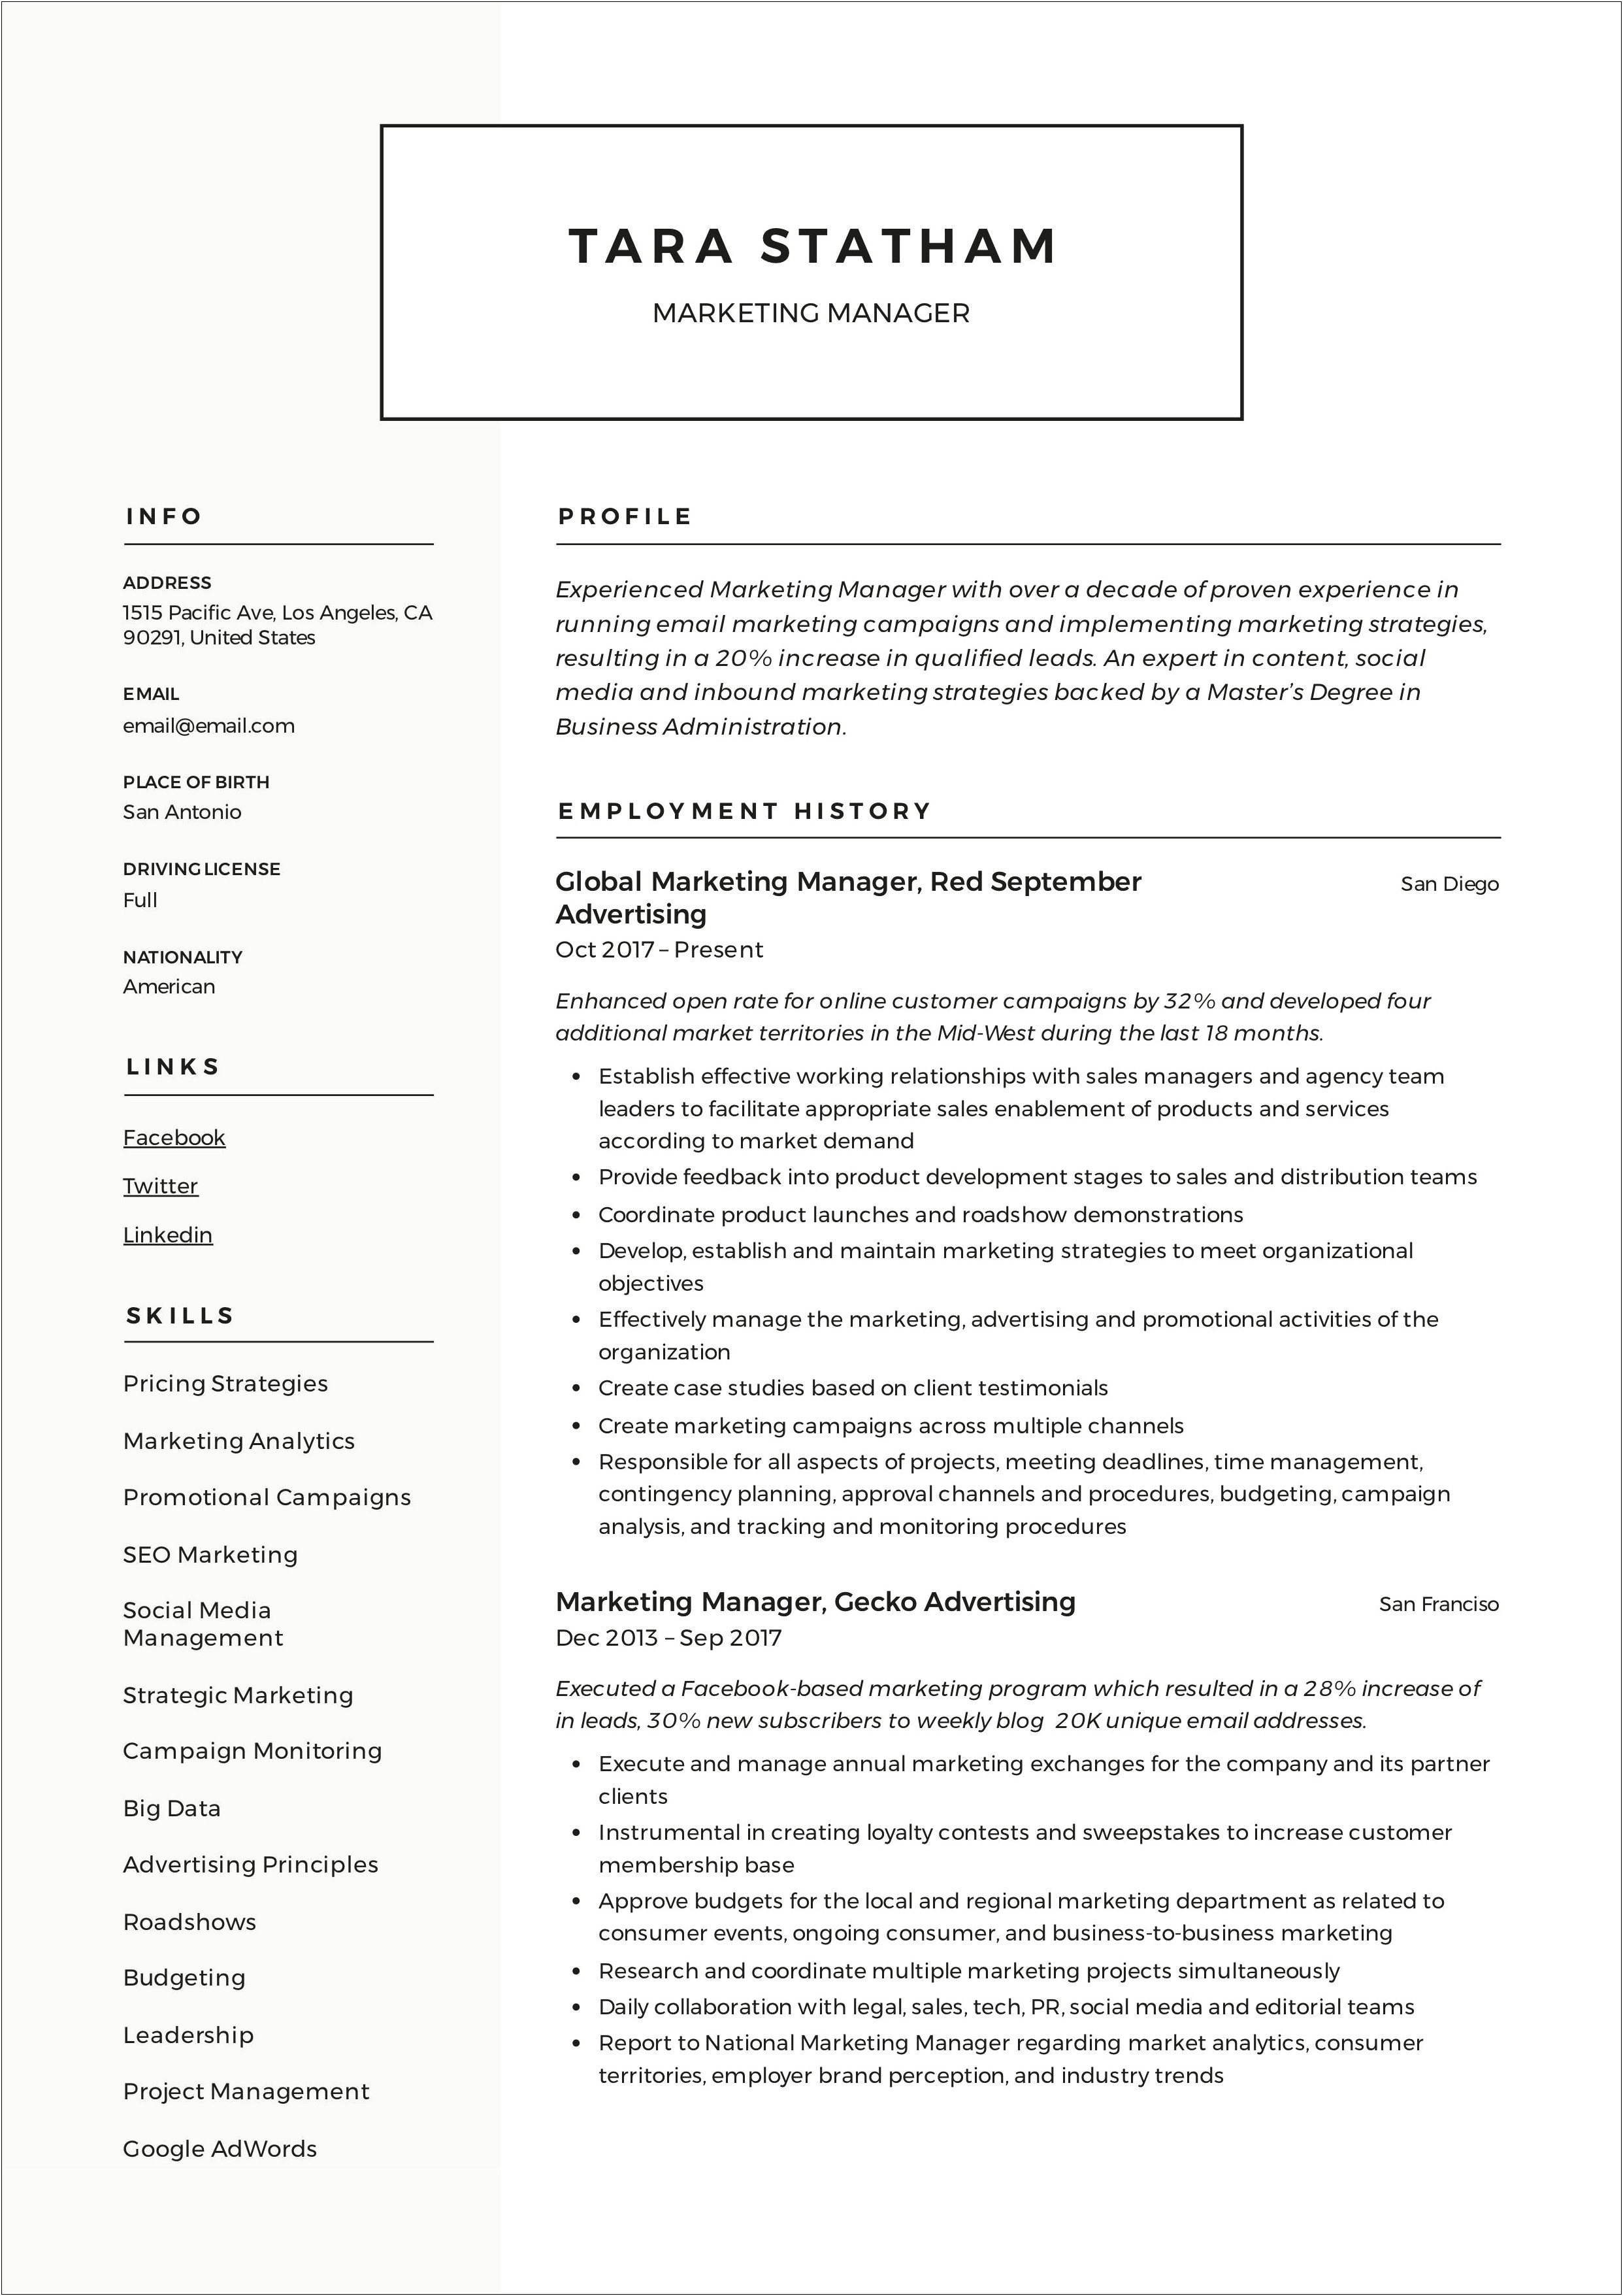 Resume Format For Fmcg Sales Manager